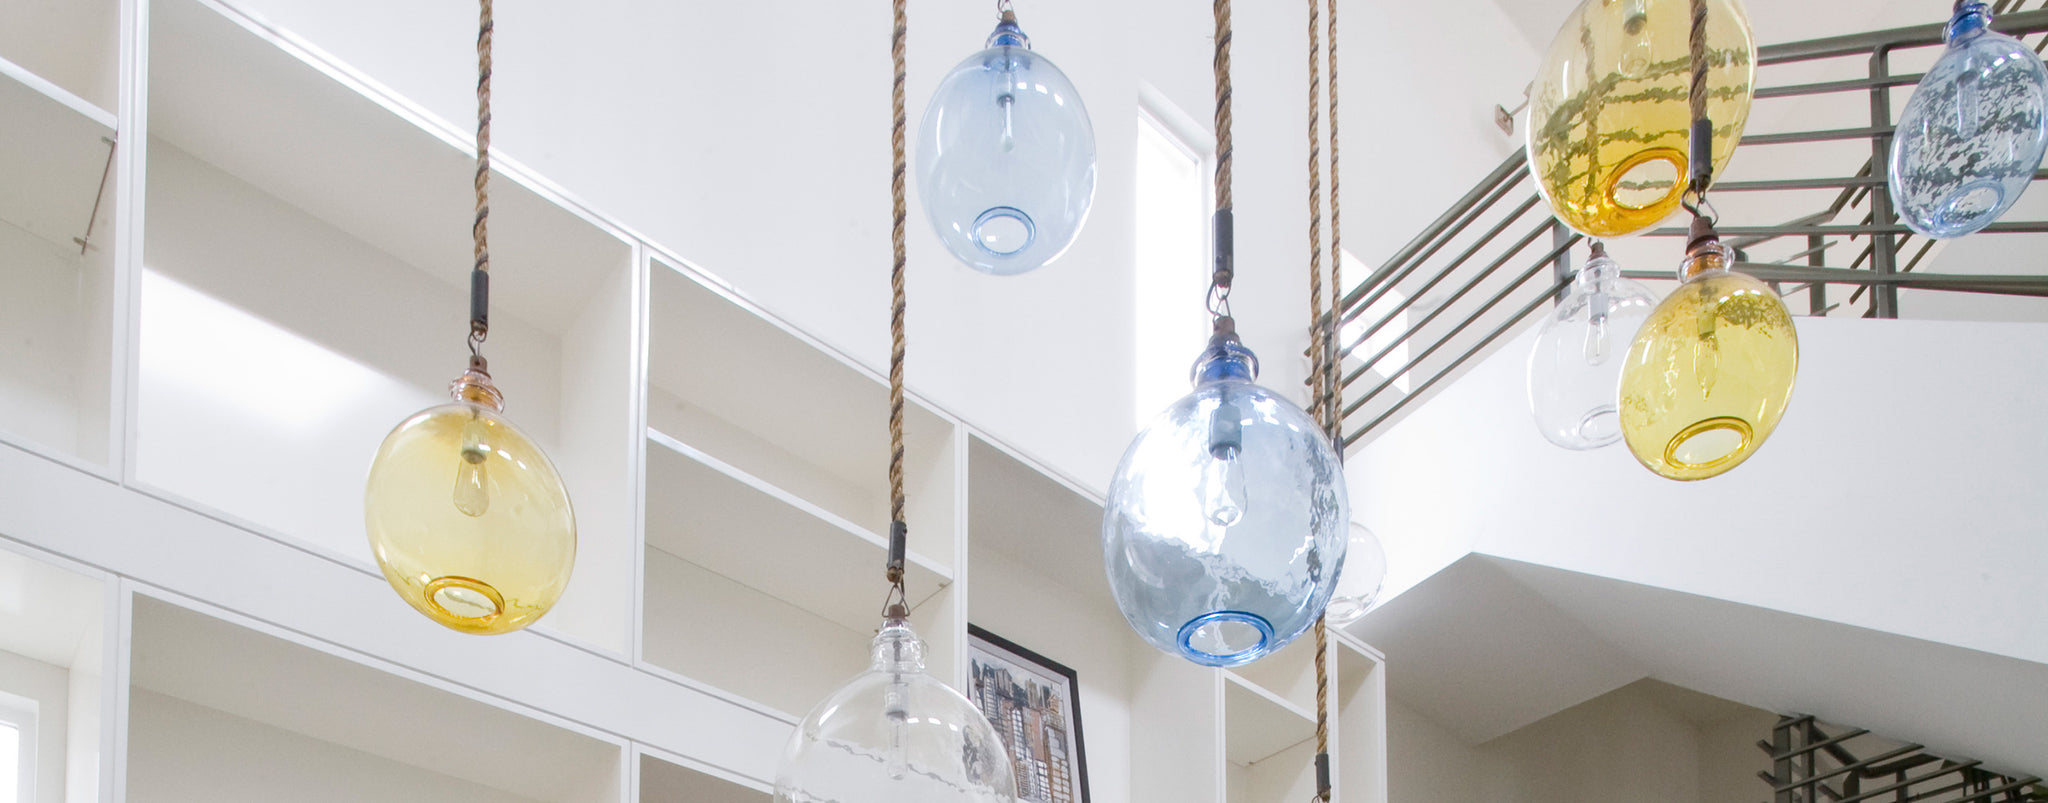 hanging pendent glass lights in yellow, blue and clear in a bright interior with white architectural details and a stairway to the right